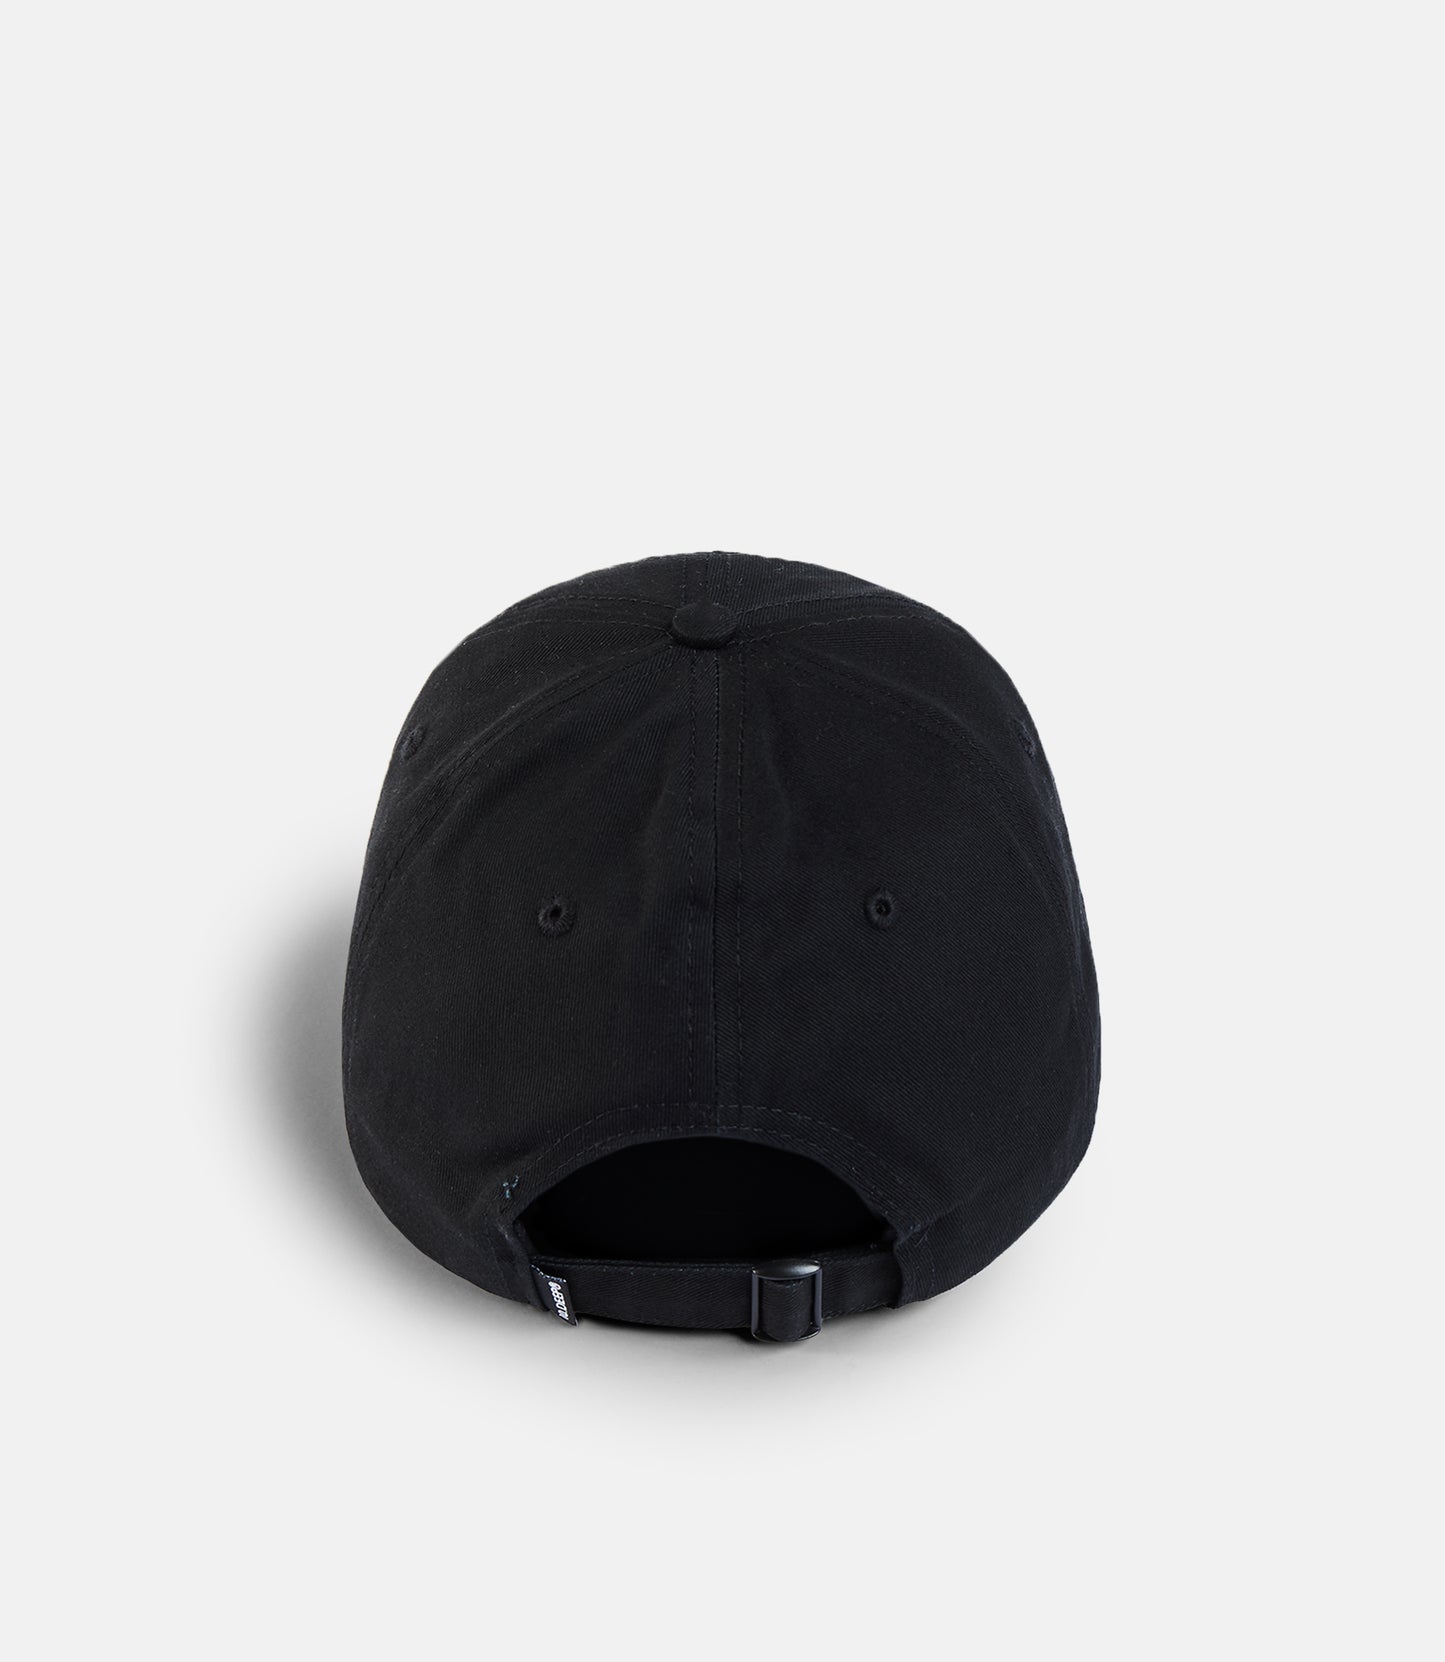 10Deep - Top Of The Chain Dad Hat, Black